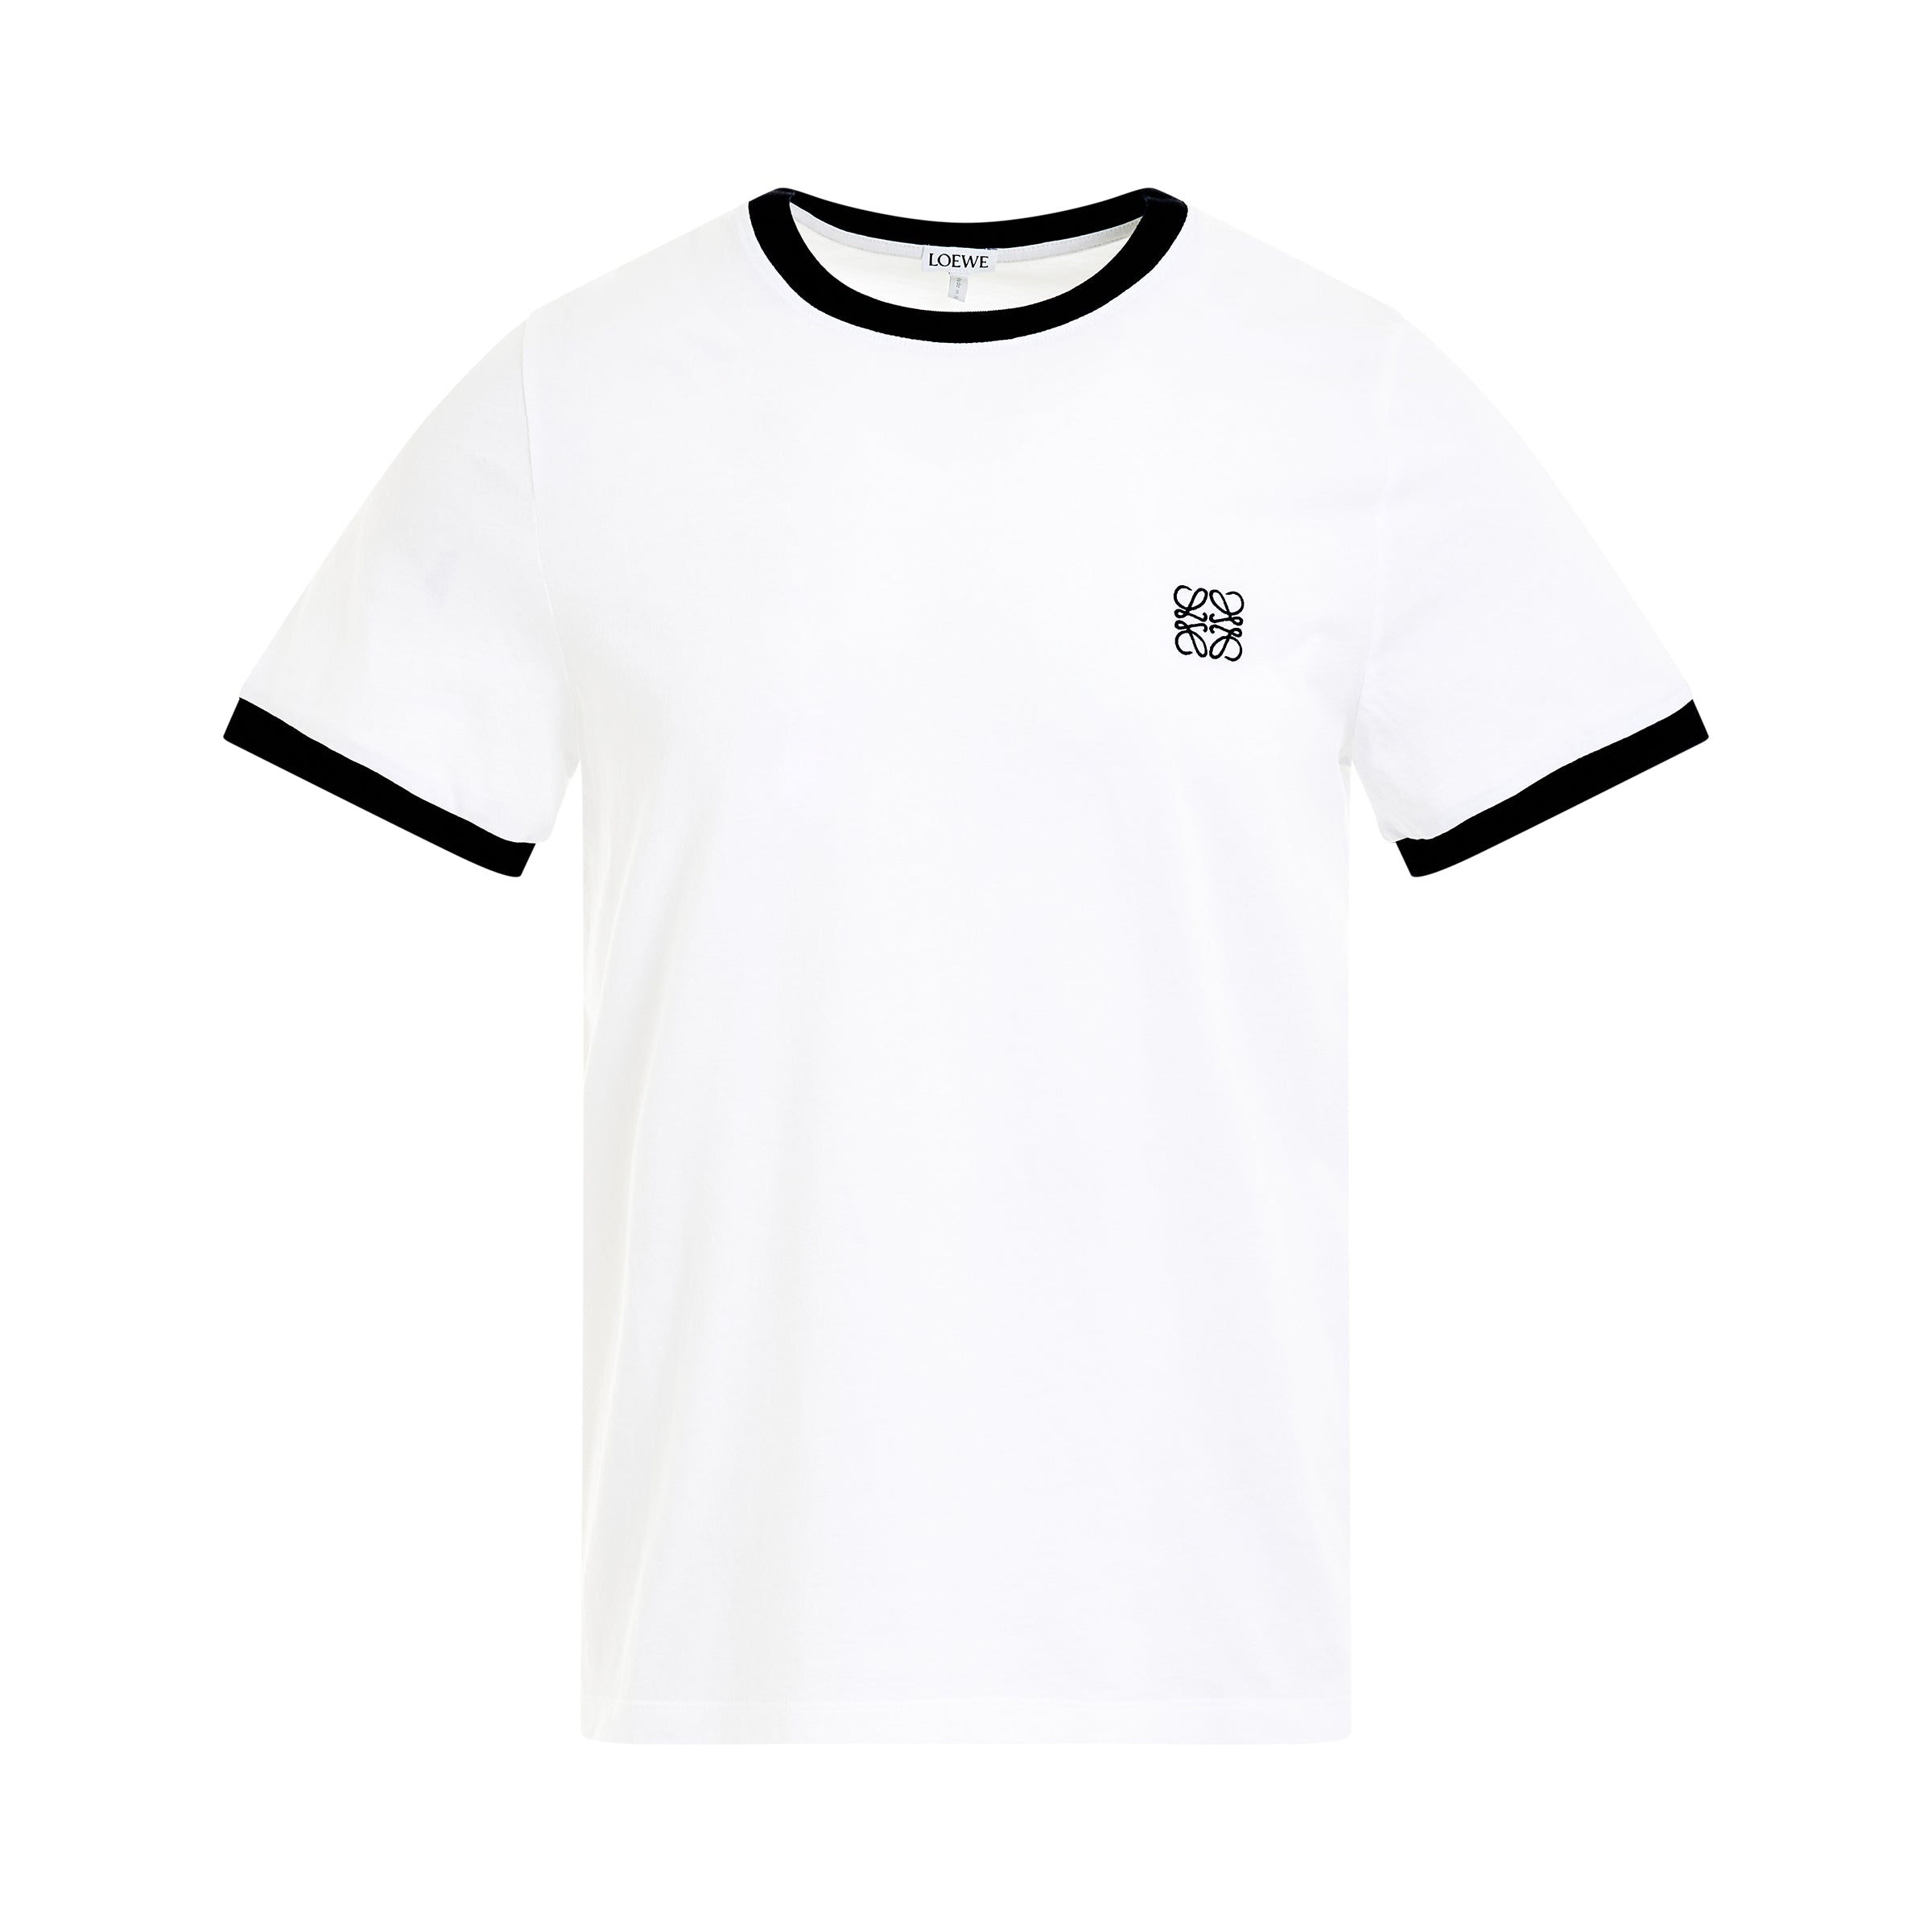 Anagram Contrast T-Shirt in White/Black